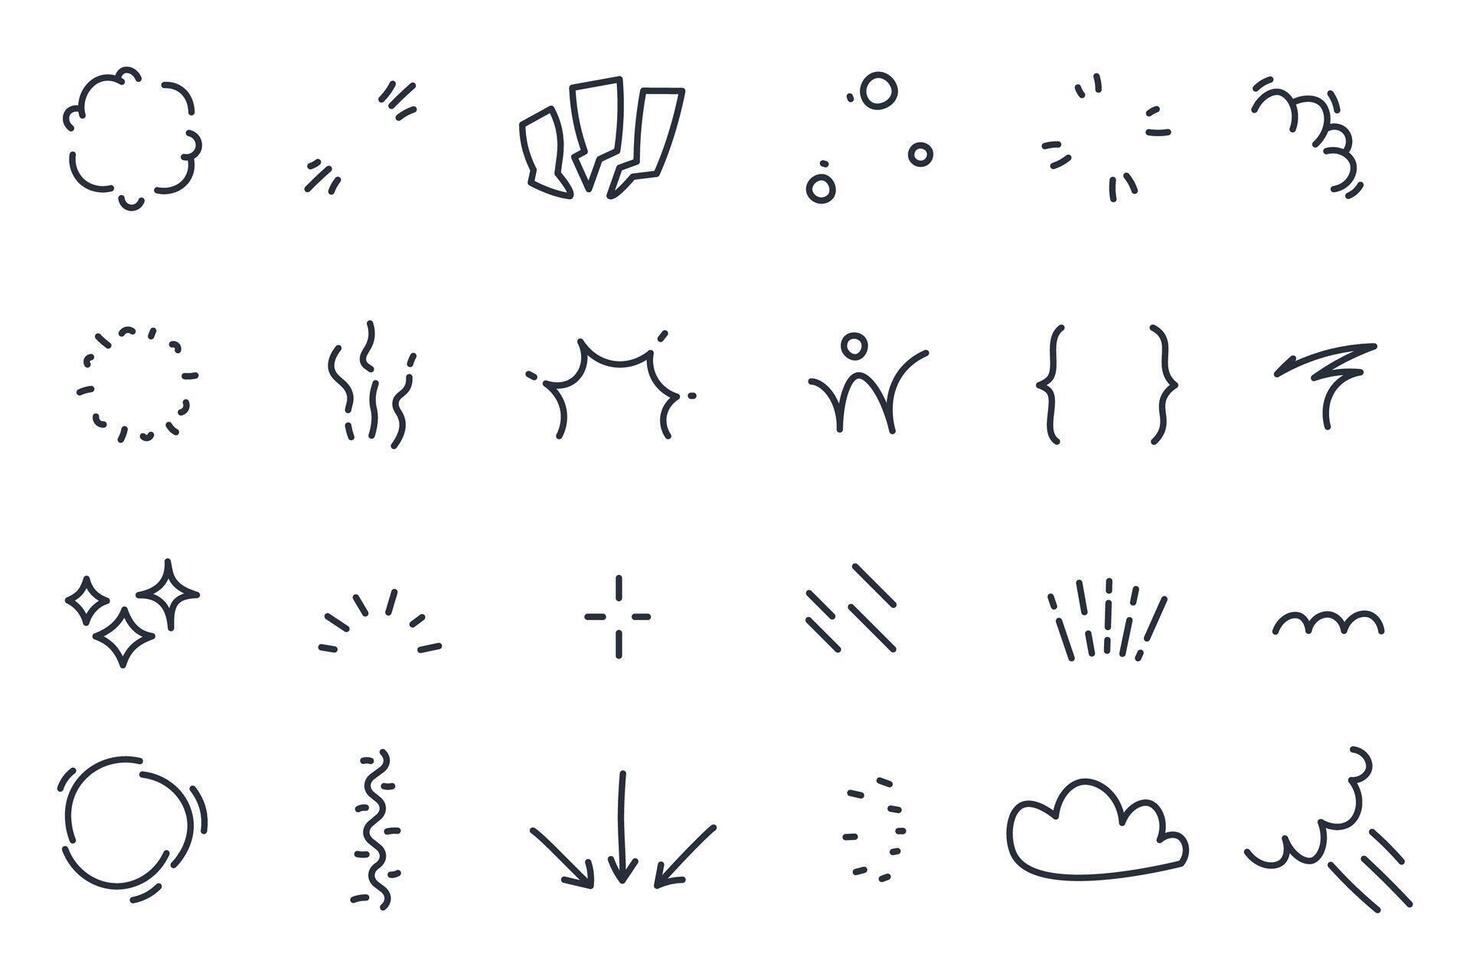 Manga character emotion signs. Doodle comic emotions reflection with different symbols, exclamation and question mark signs. Vector isolated collection